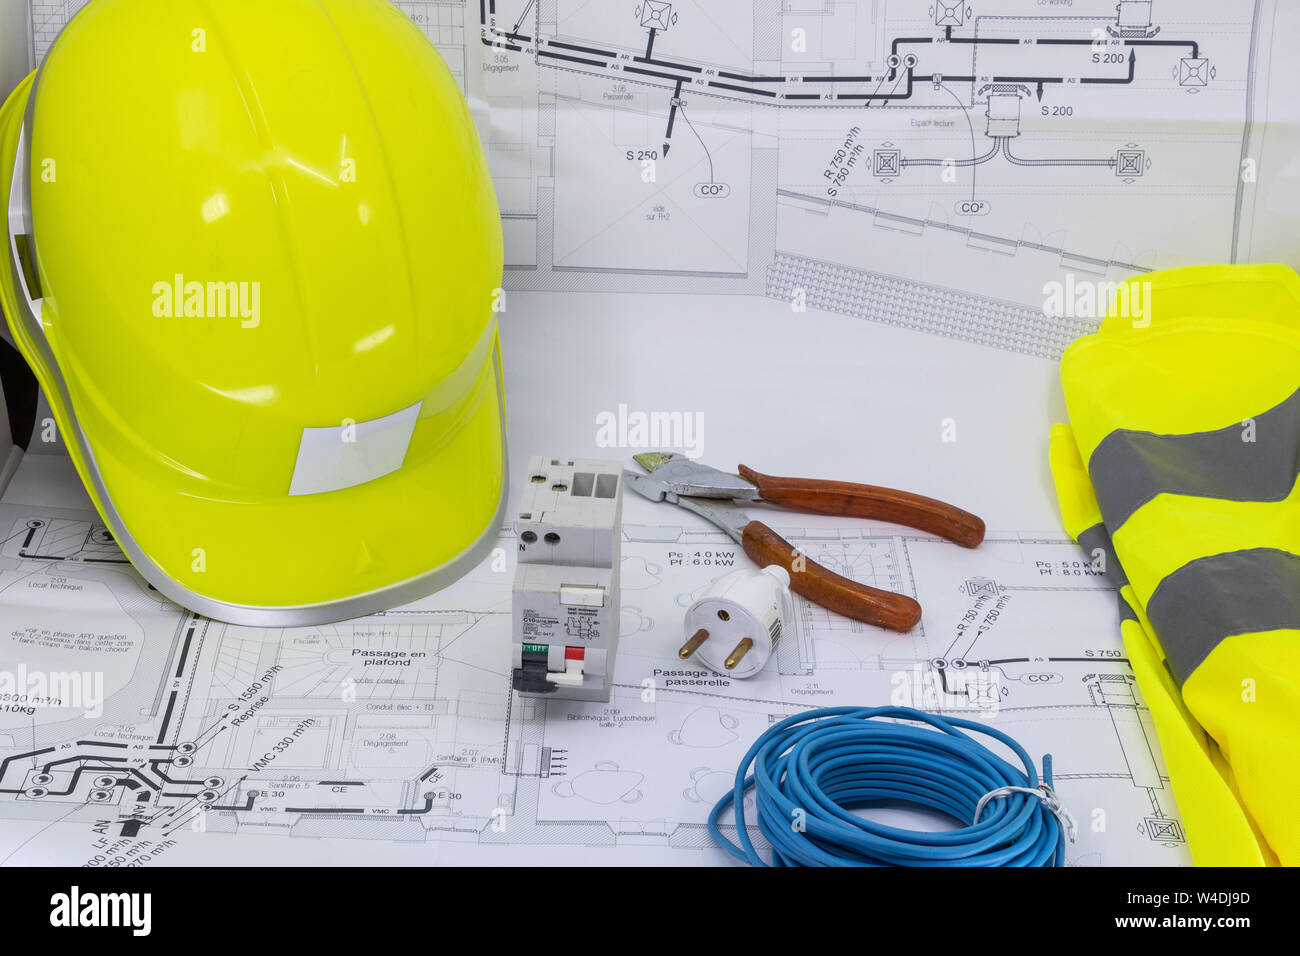 Electricity, Electrician Graphic Resource With Home Plan Safety Equipment And Electrical Equipment For Electrician Stock Photo